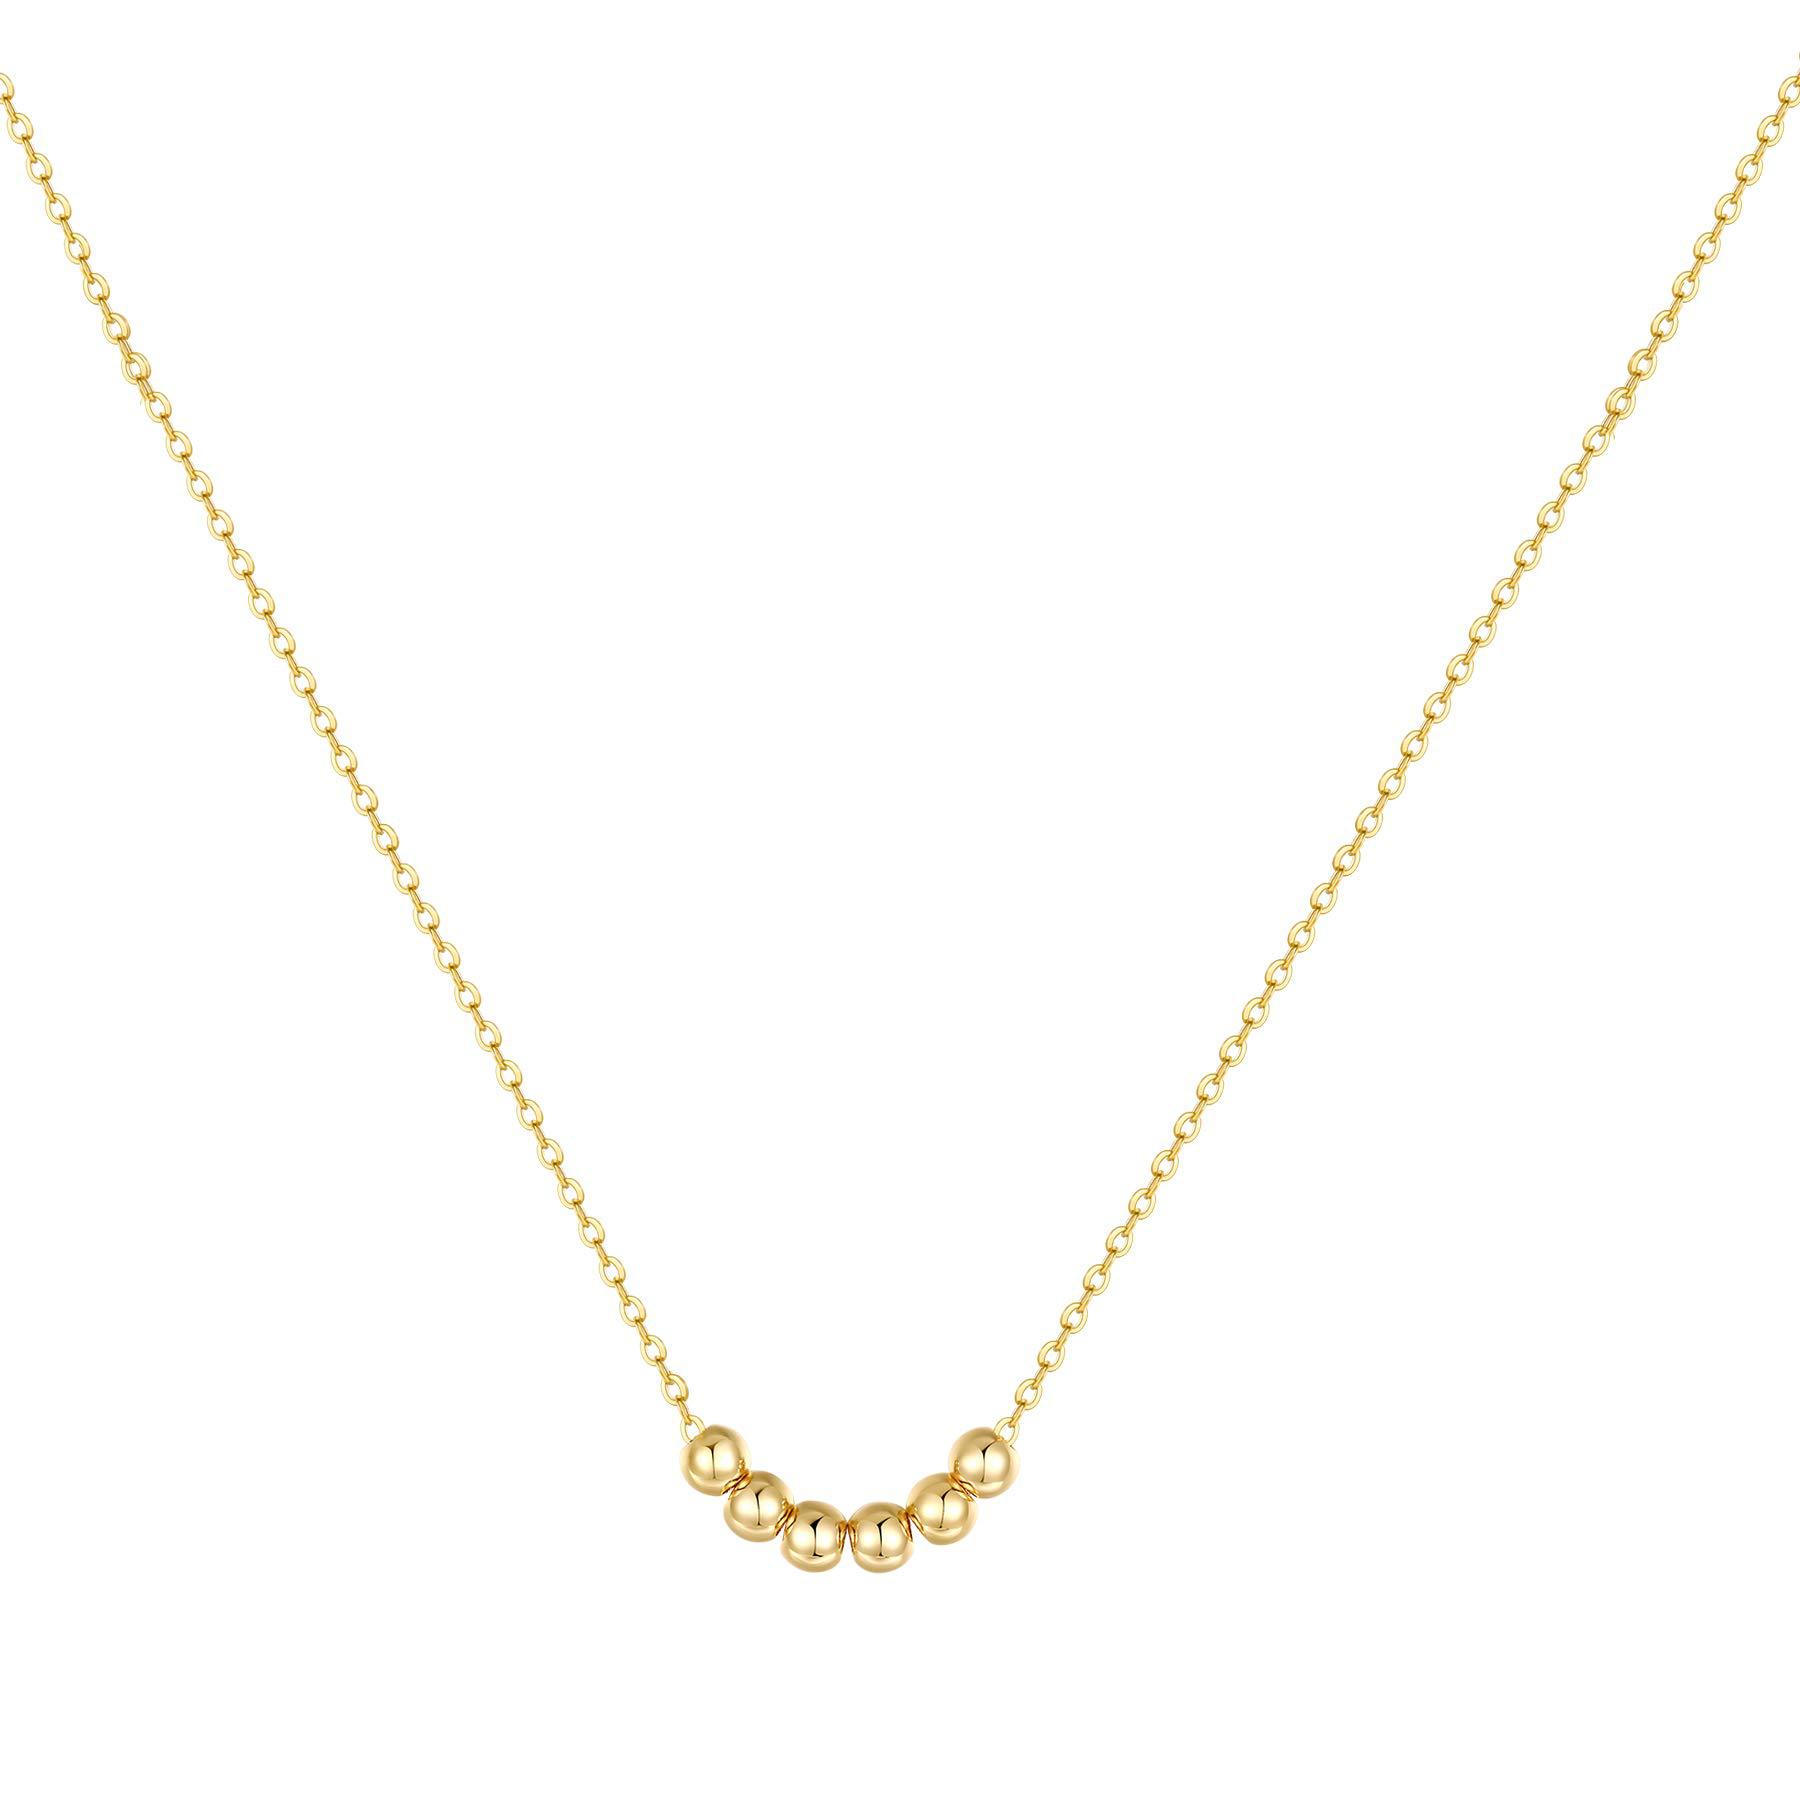 Fashion Women Dainty 18K Gold Tiny Heart Necklaces Pendant Choker Cute  Jewelry Geometric Interlocking Necklaces Handmade Simple Necklaces for  Girlfriend Gifts